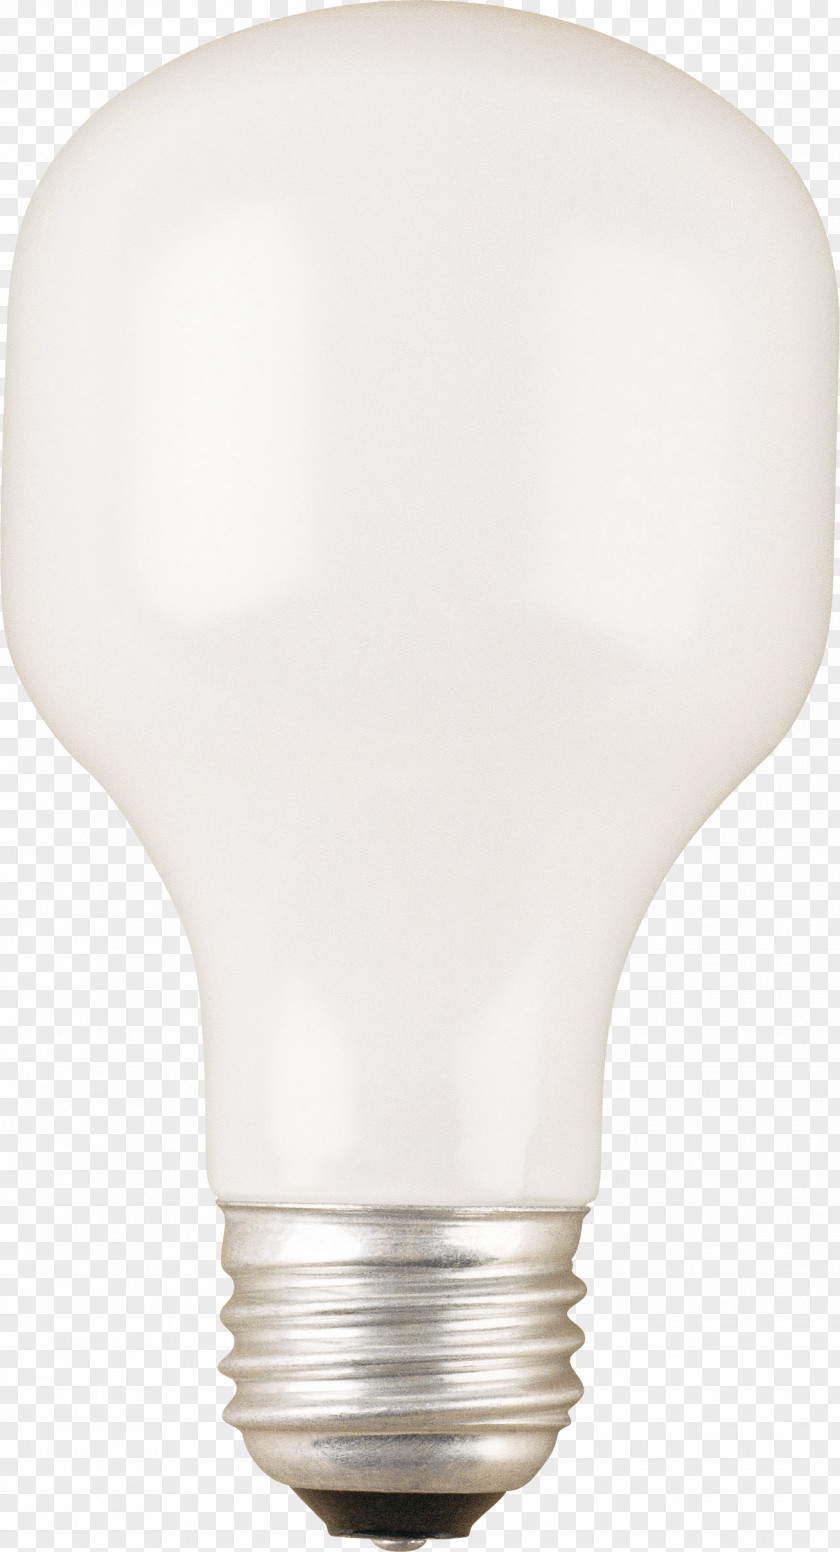 Lamp Image Lighting Design Product PNG